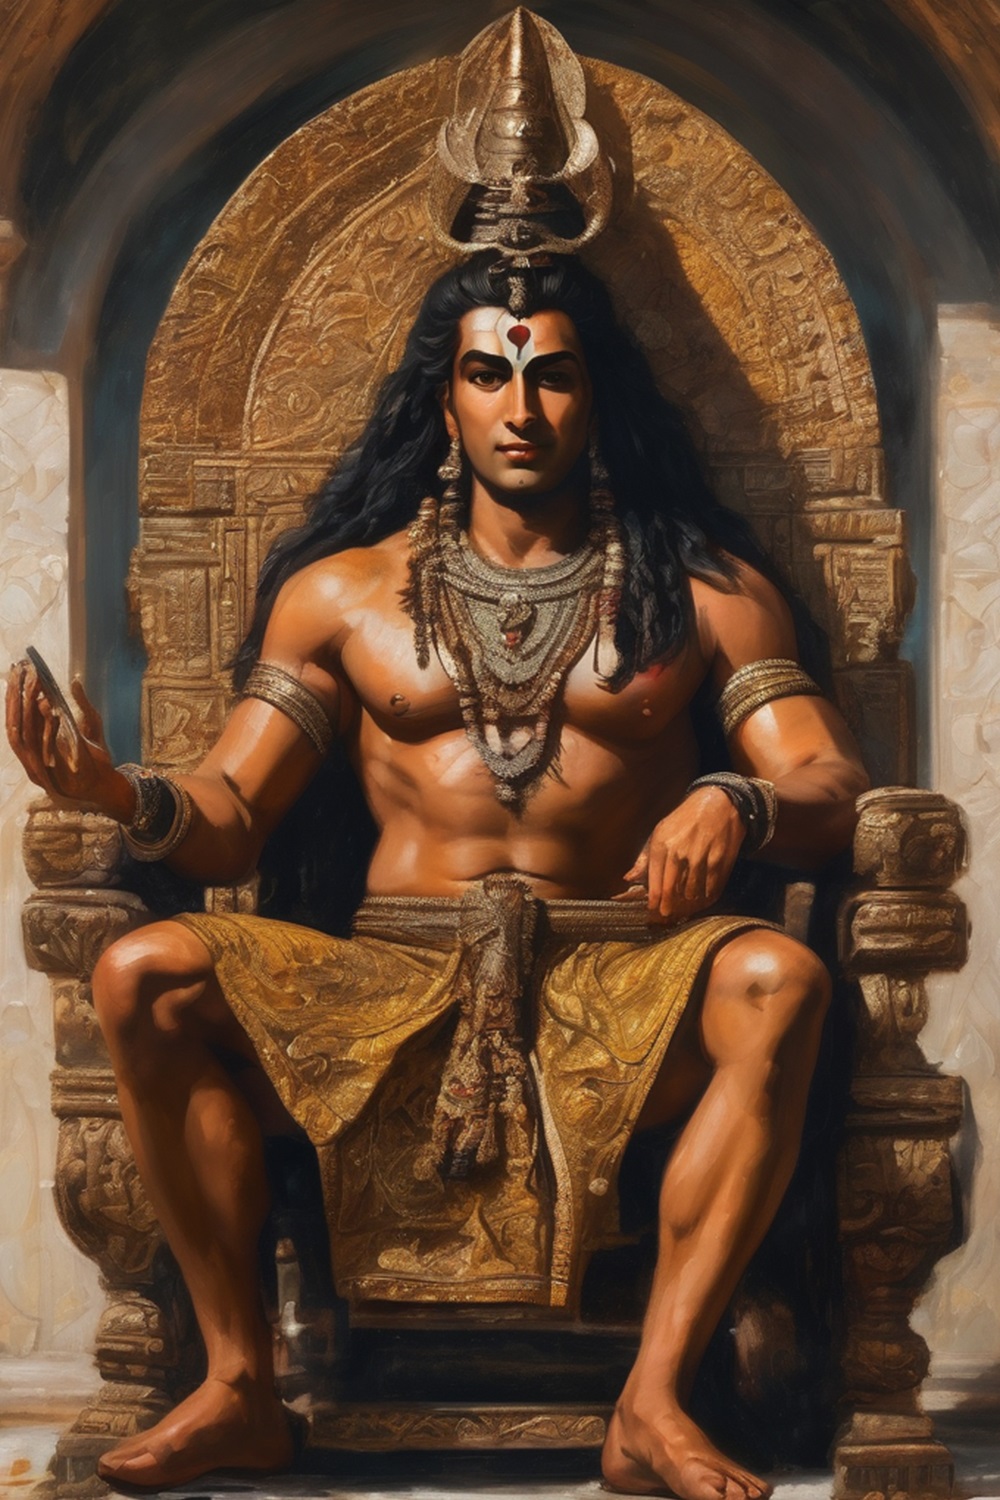 Shiva sitting on stone chair oil painting pinterest preview image.